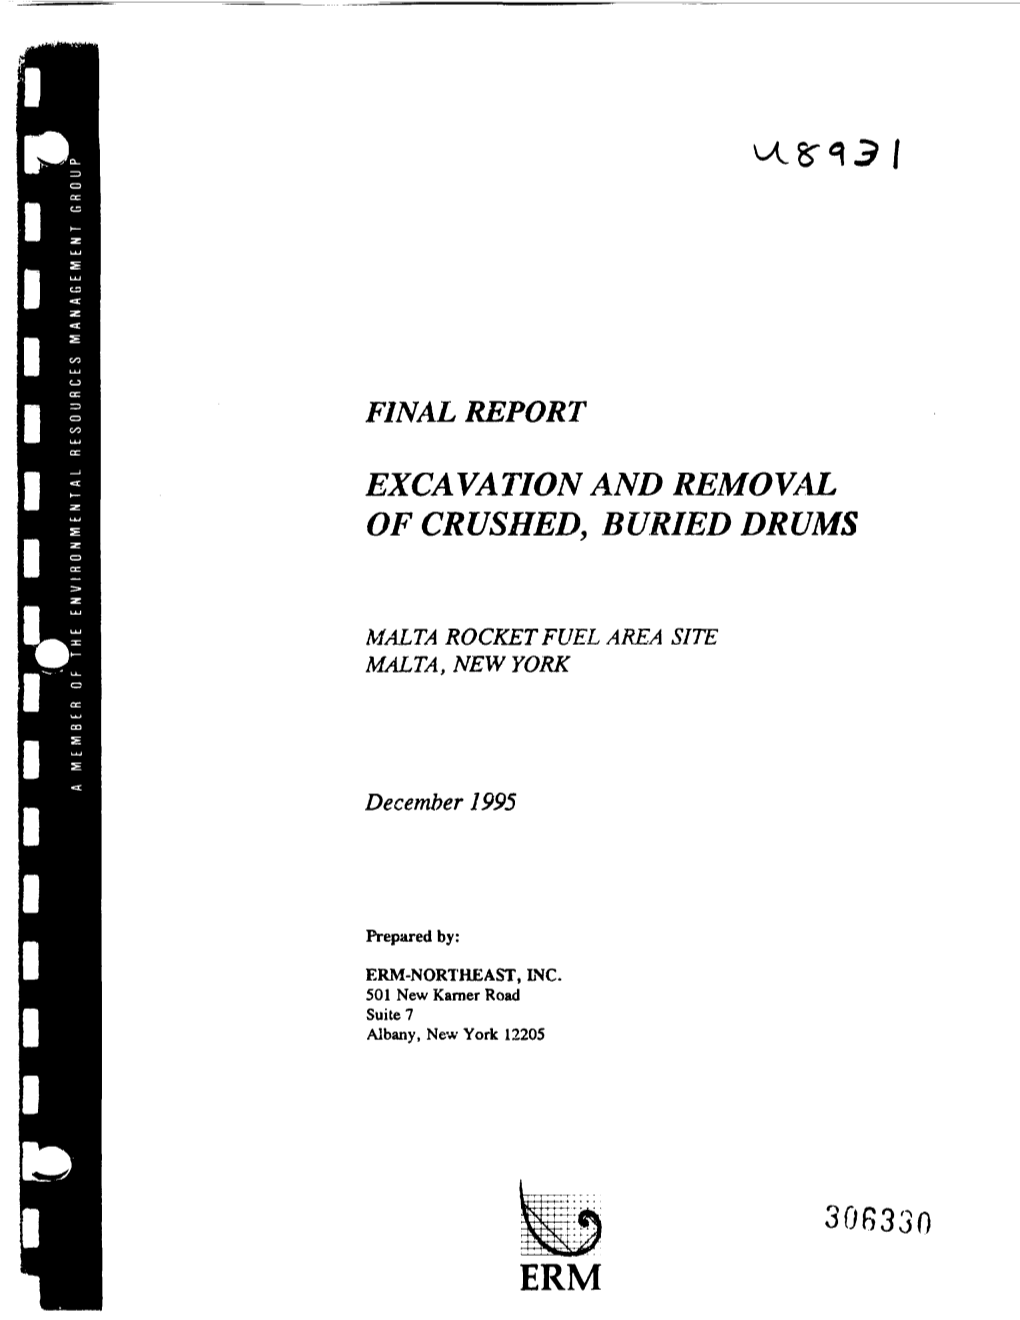 Final Report, Excavation and Removal of Crushed, Buried Drums, Malta Rocket Fuel Area Site, Malta, New York